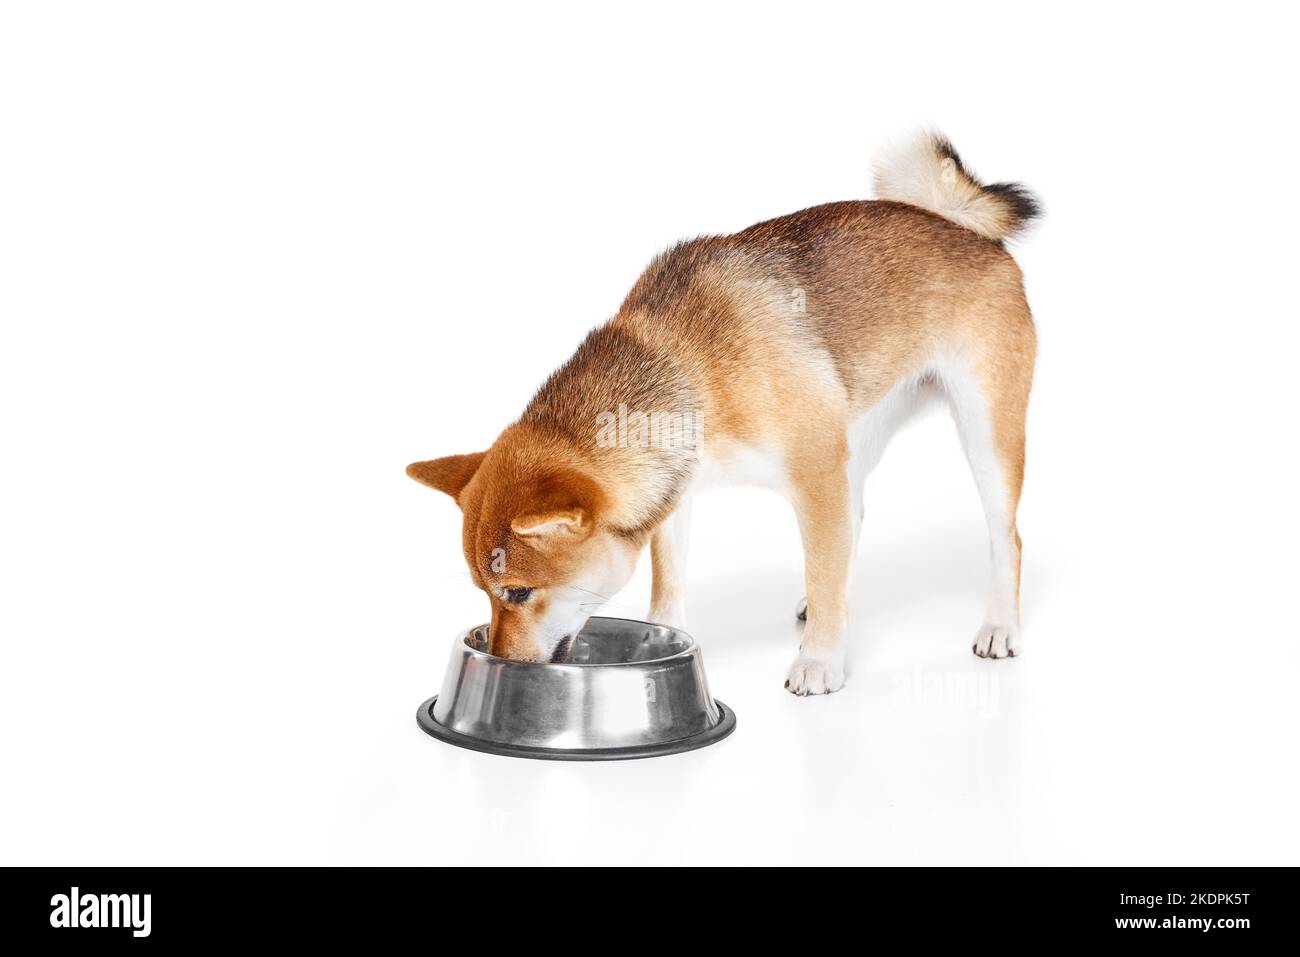 One purebred dog Shiba Inu eating from bowl isolated over white background. Animal, pets, care, beauty and ad concept. Pet looks calm, active and Stock Photo